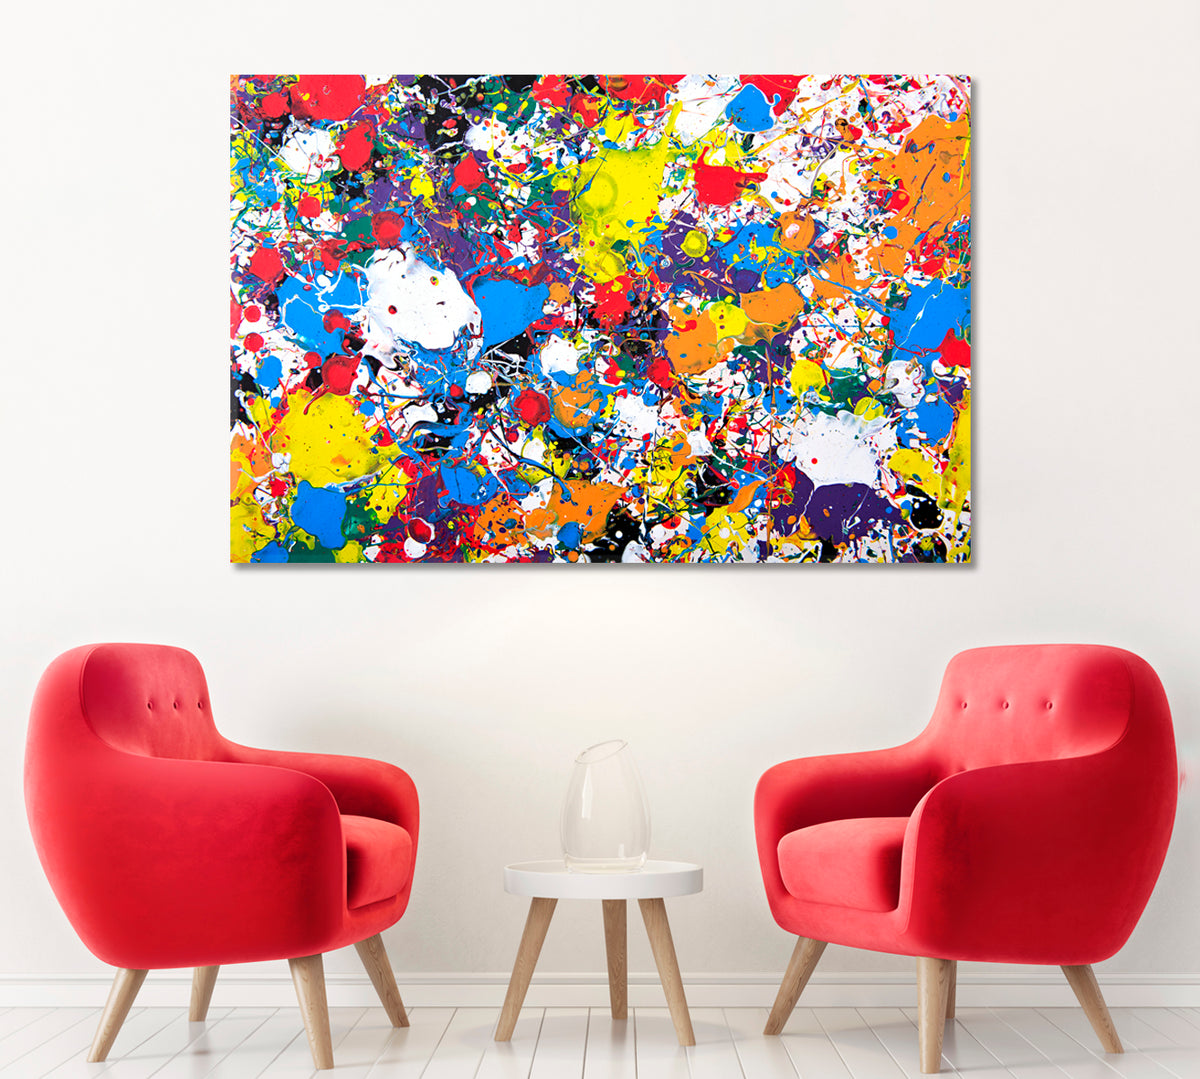 Colorful Abstract Splashes Canvas Print ArtLexy 1 Panel 24"x16" inches 